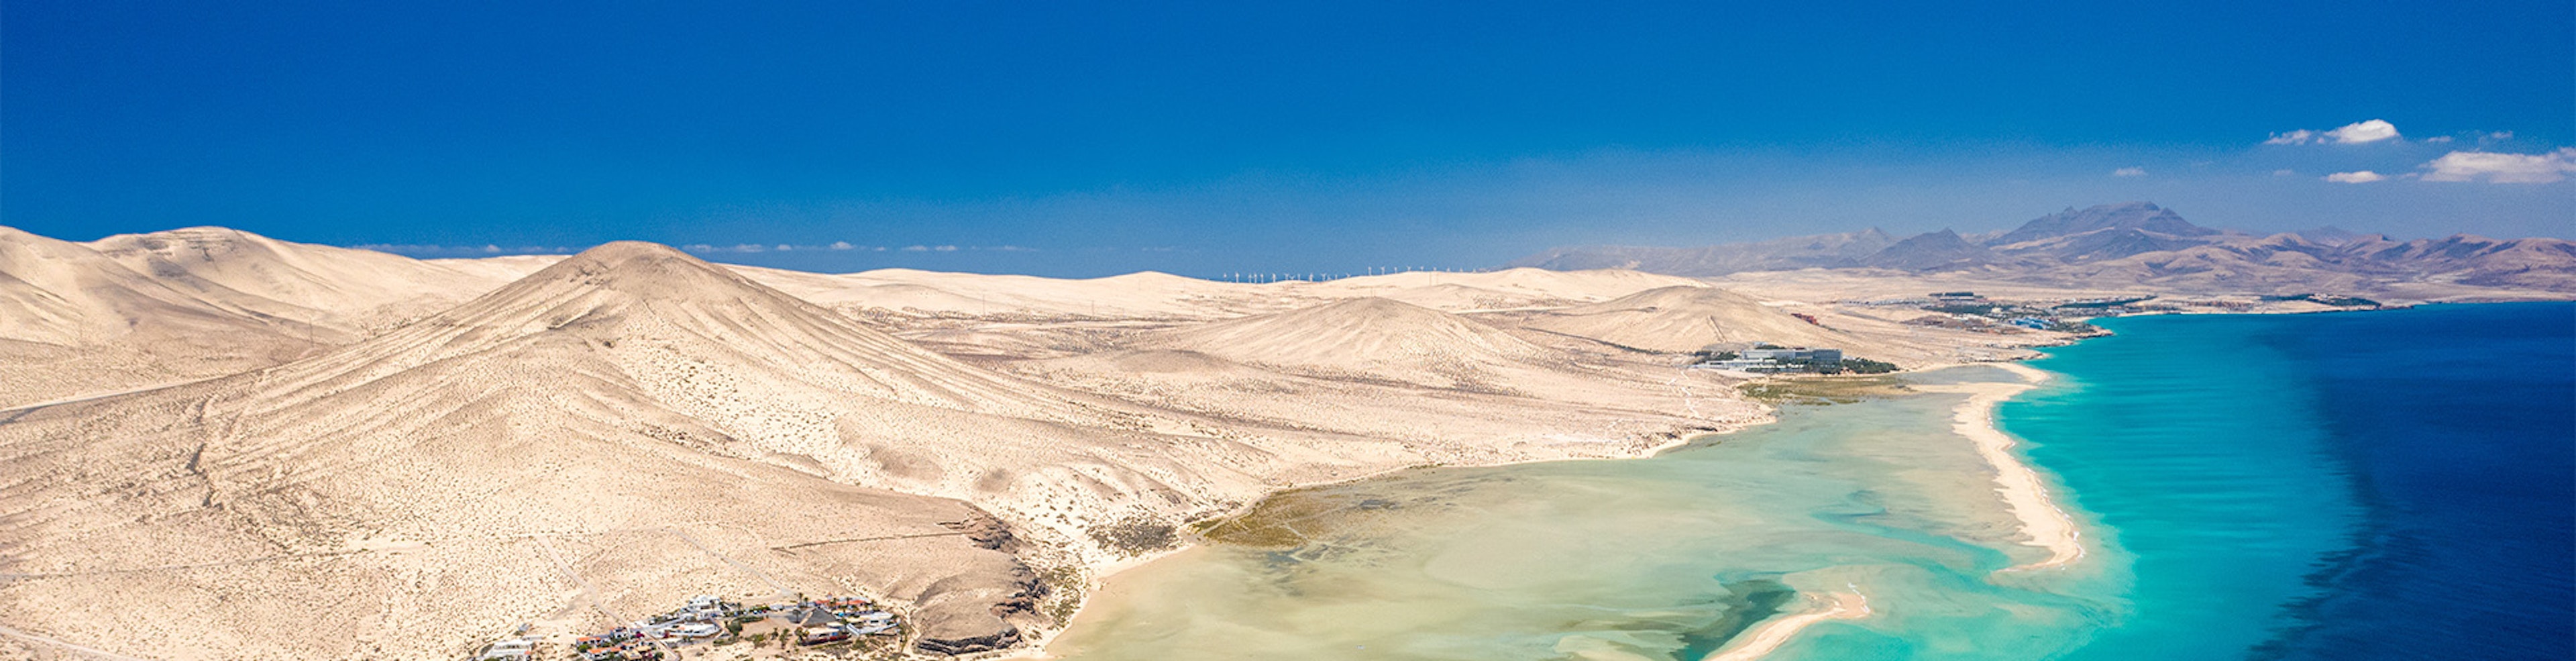 The white beaches and blue sea of Fuerteventura, one of Spain's Canary Islands